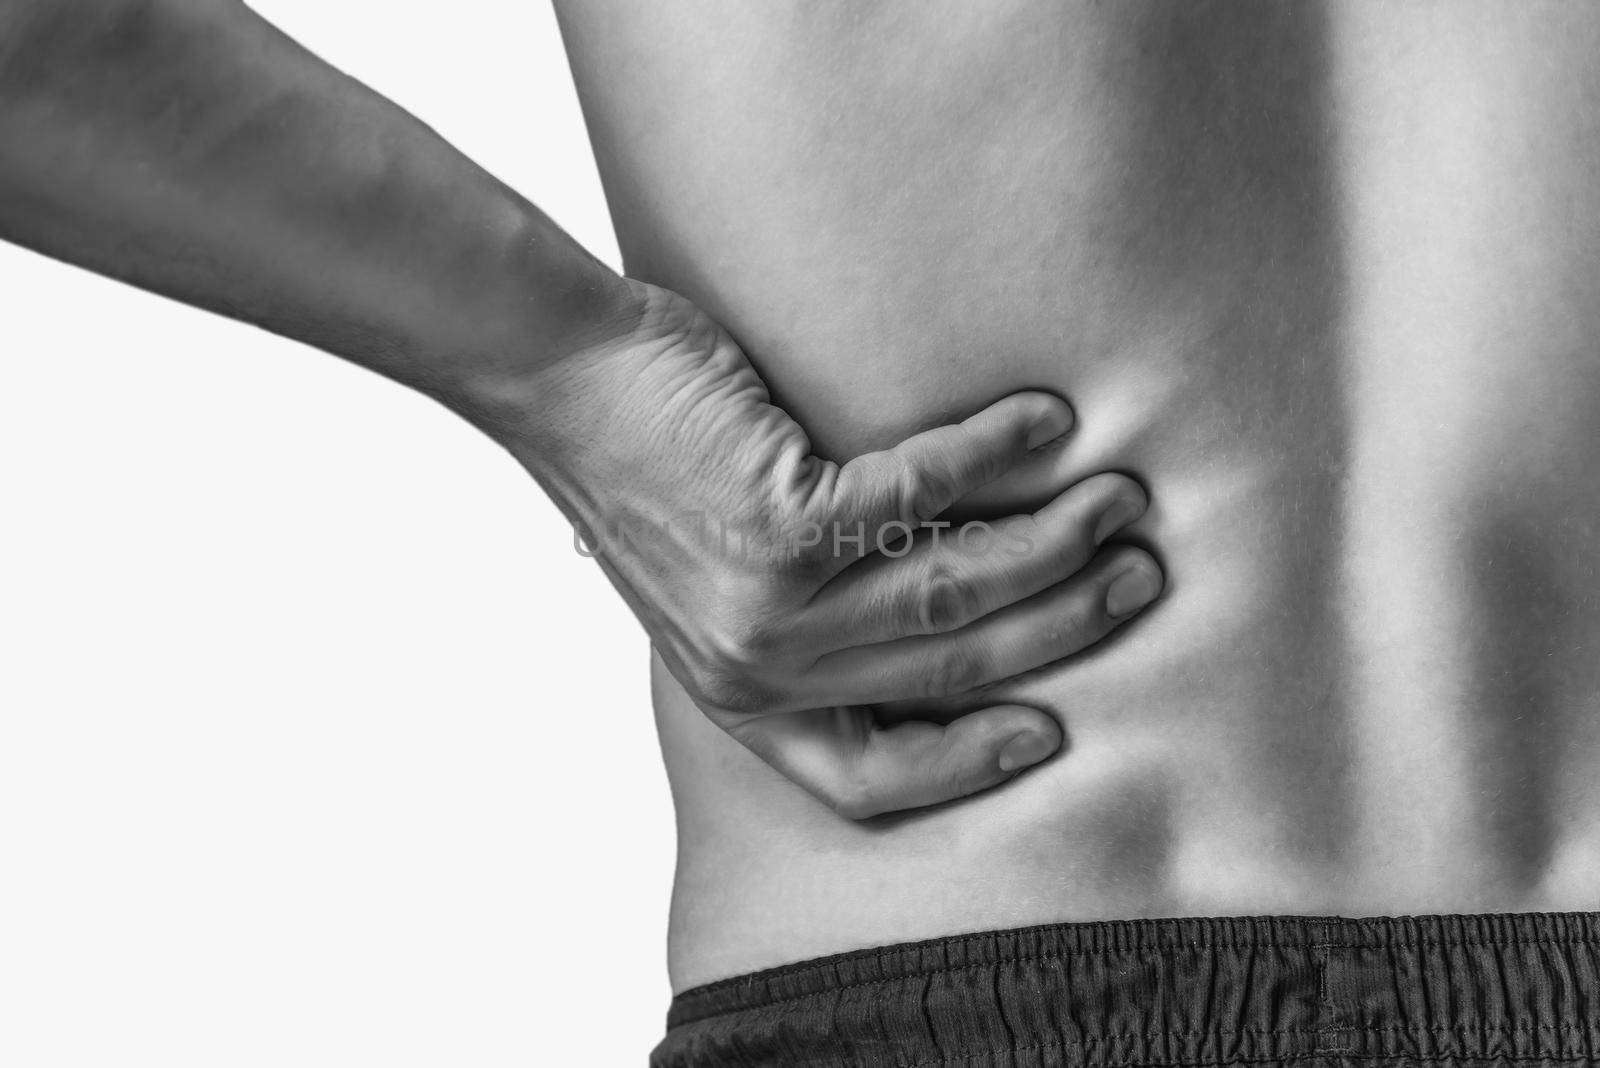 Man touches the lower back, pain in the kidney. Monochrome image, isolated on a white background